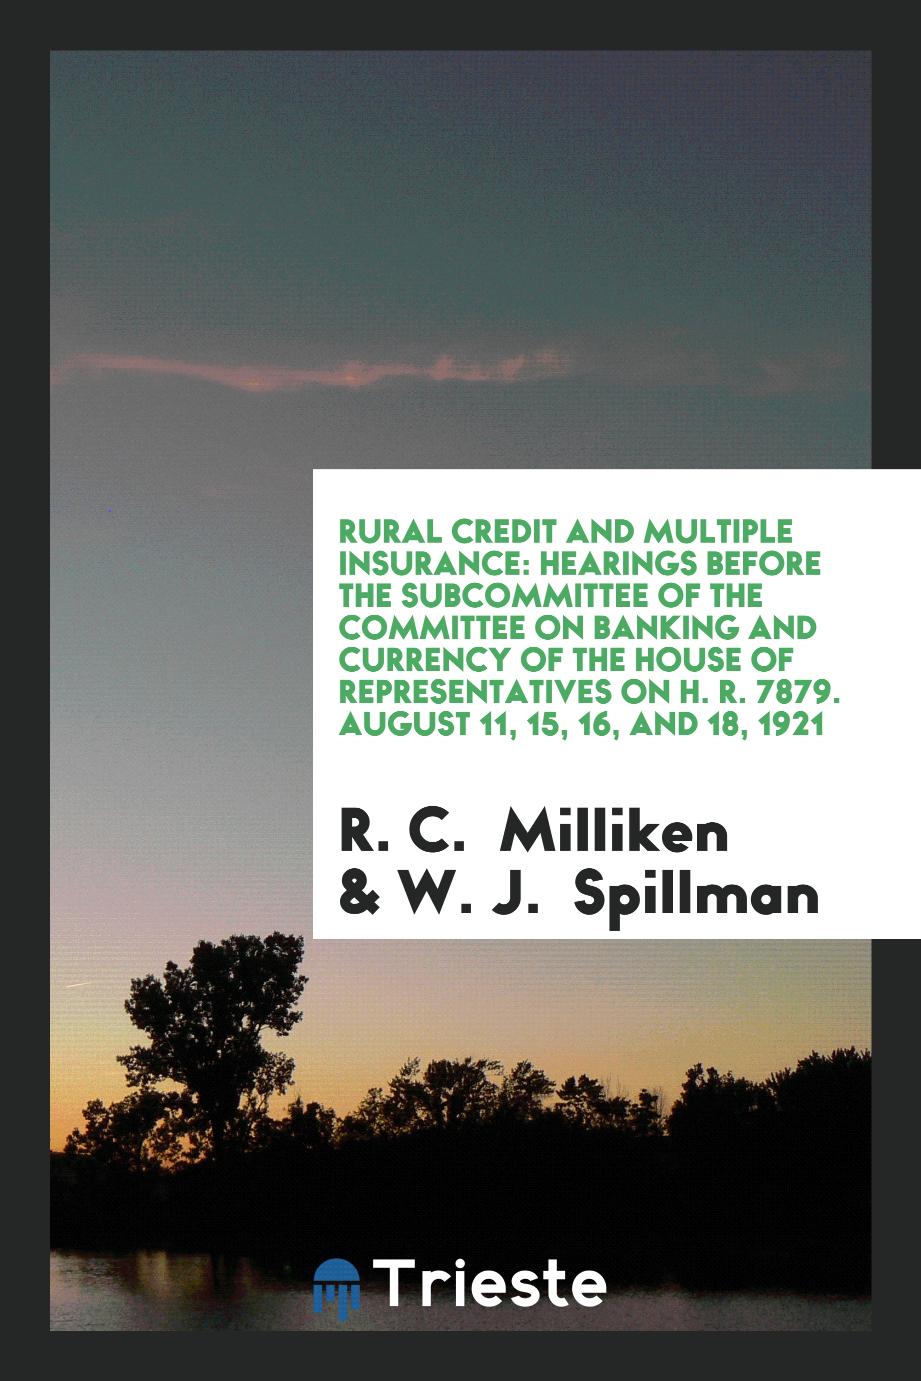 Rural Credit and Multiple Insurance: Hearings Before the Subcommittee of the Committee on banking and currency of the house of representatives on H. R. 7879. August 11, 15, 16, and 18, 1921